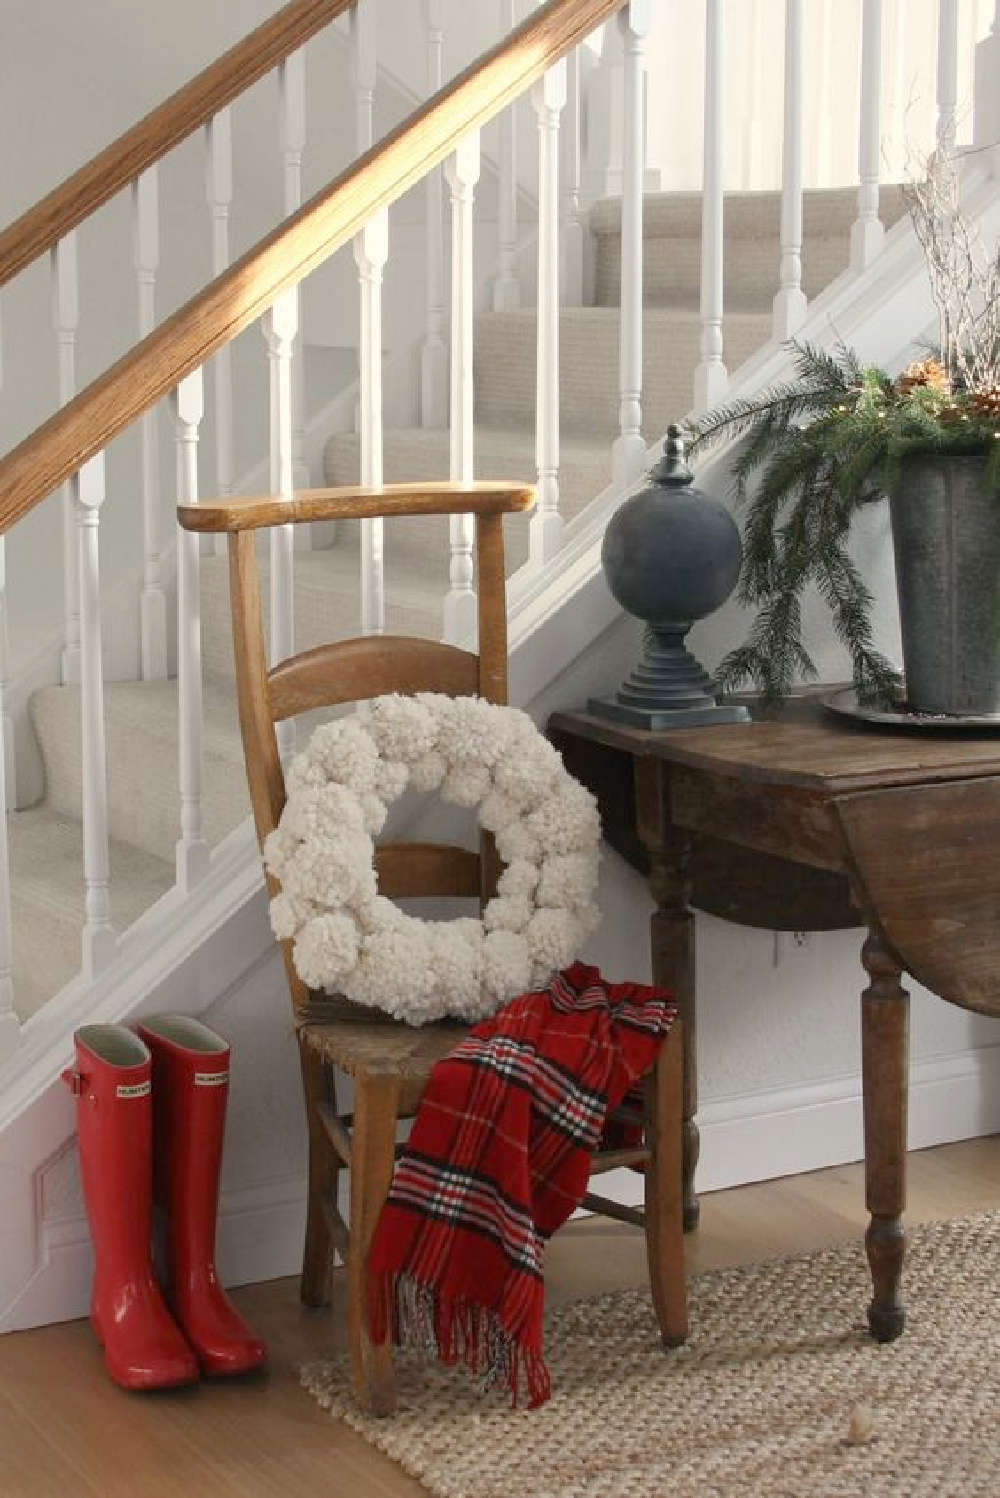 BM White OC-151. Christmas decor in a country house entry with red boots, red plaid scarf, wooly pom pom wreath, and fresh greenery. #hellolovelystudio #christmasdecor #redboots #pompomwreath